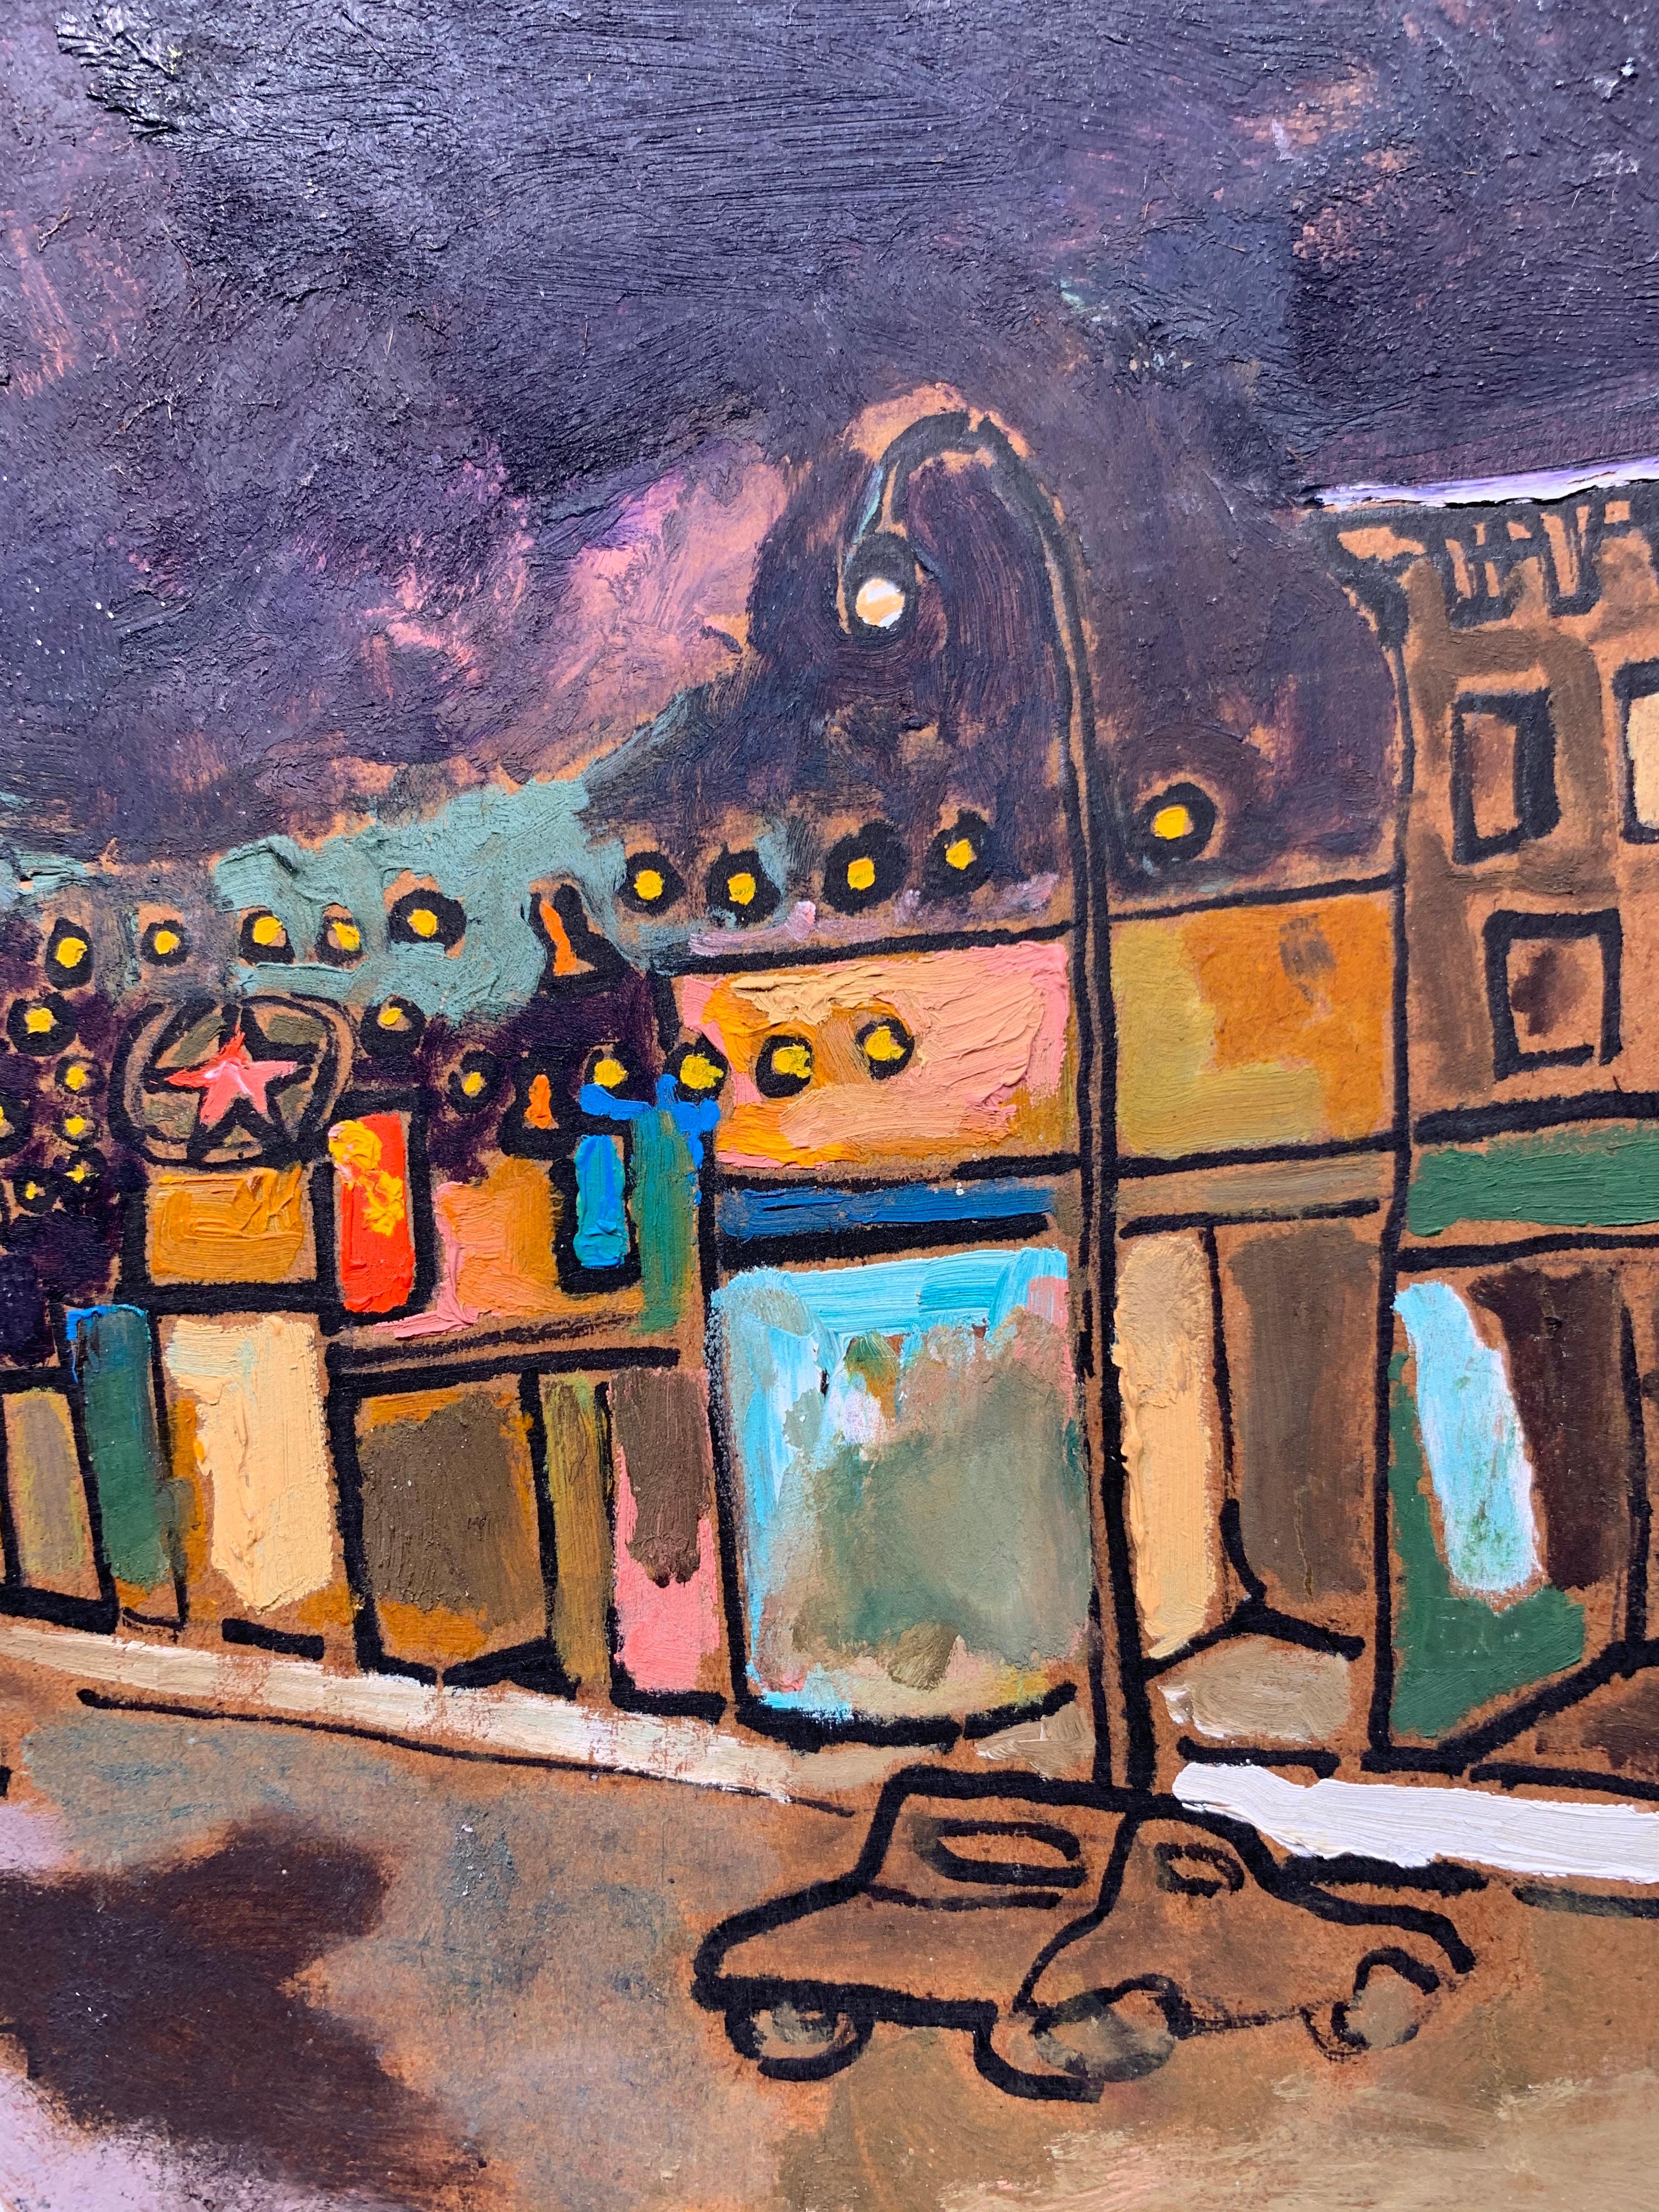 Crystal Street Train Station in Winter Moonlight (East Stroudsburg, PA) - Expressionist Painting by Sterling Boyd Strauser